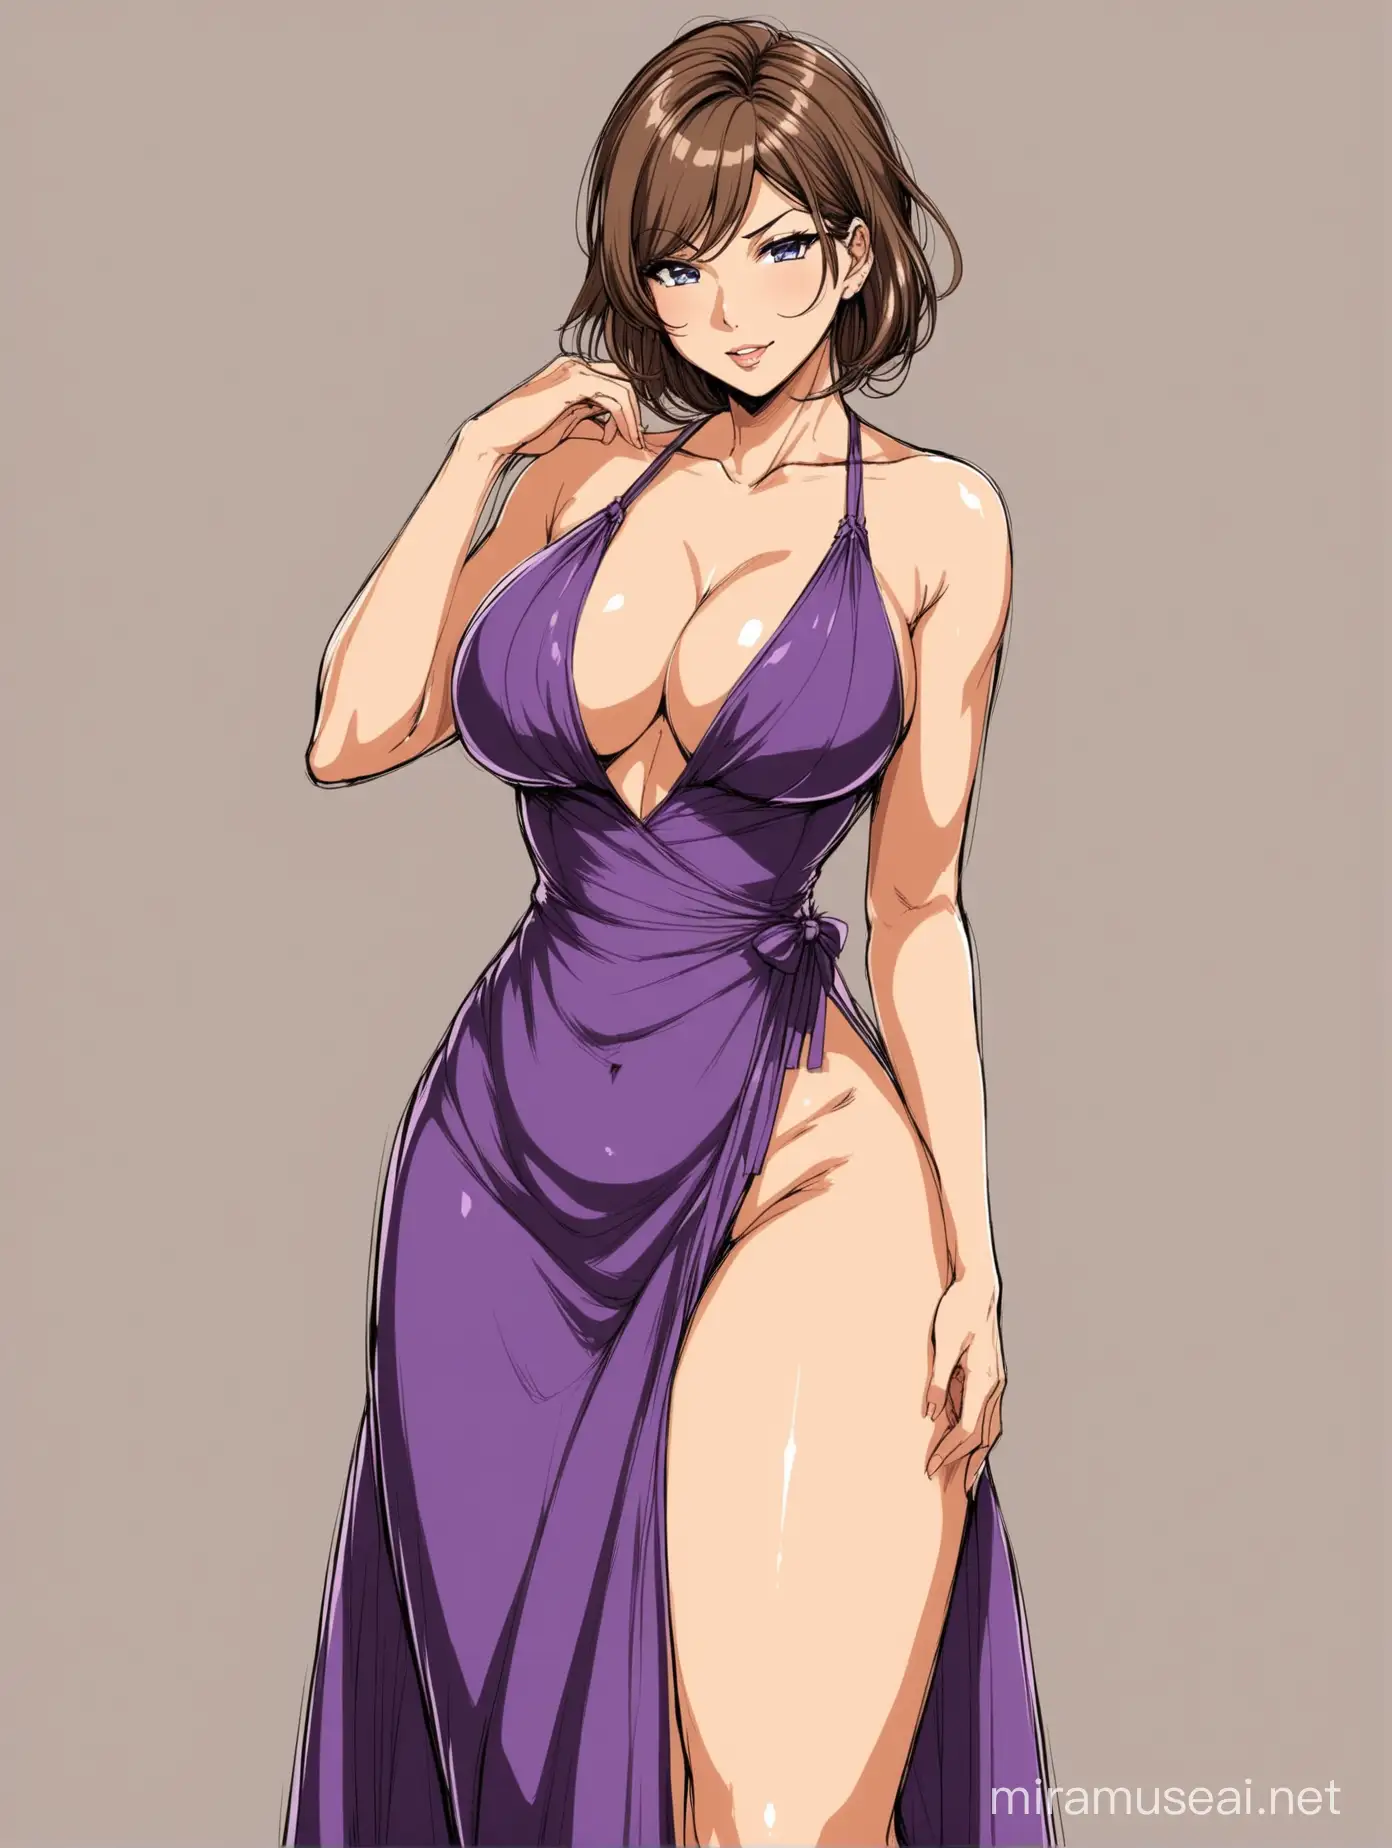 Hot sexy anime style milf dressed in a gown